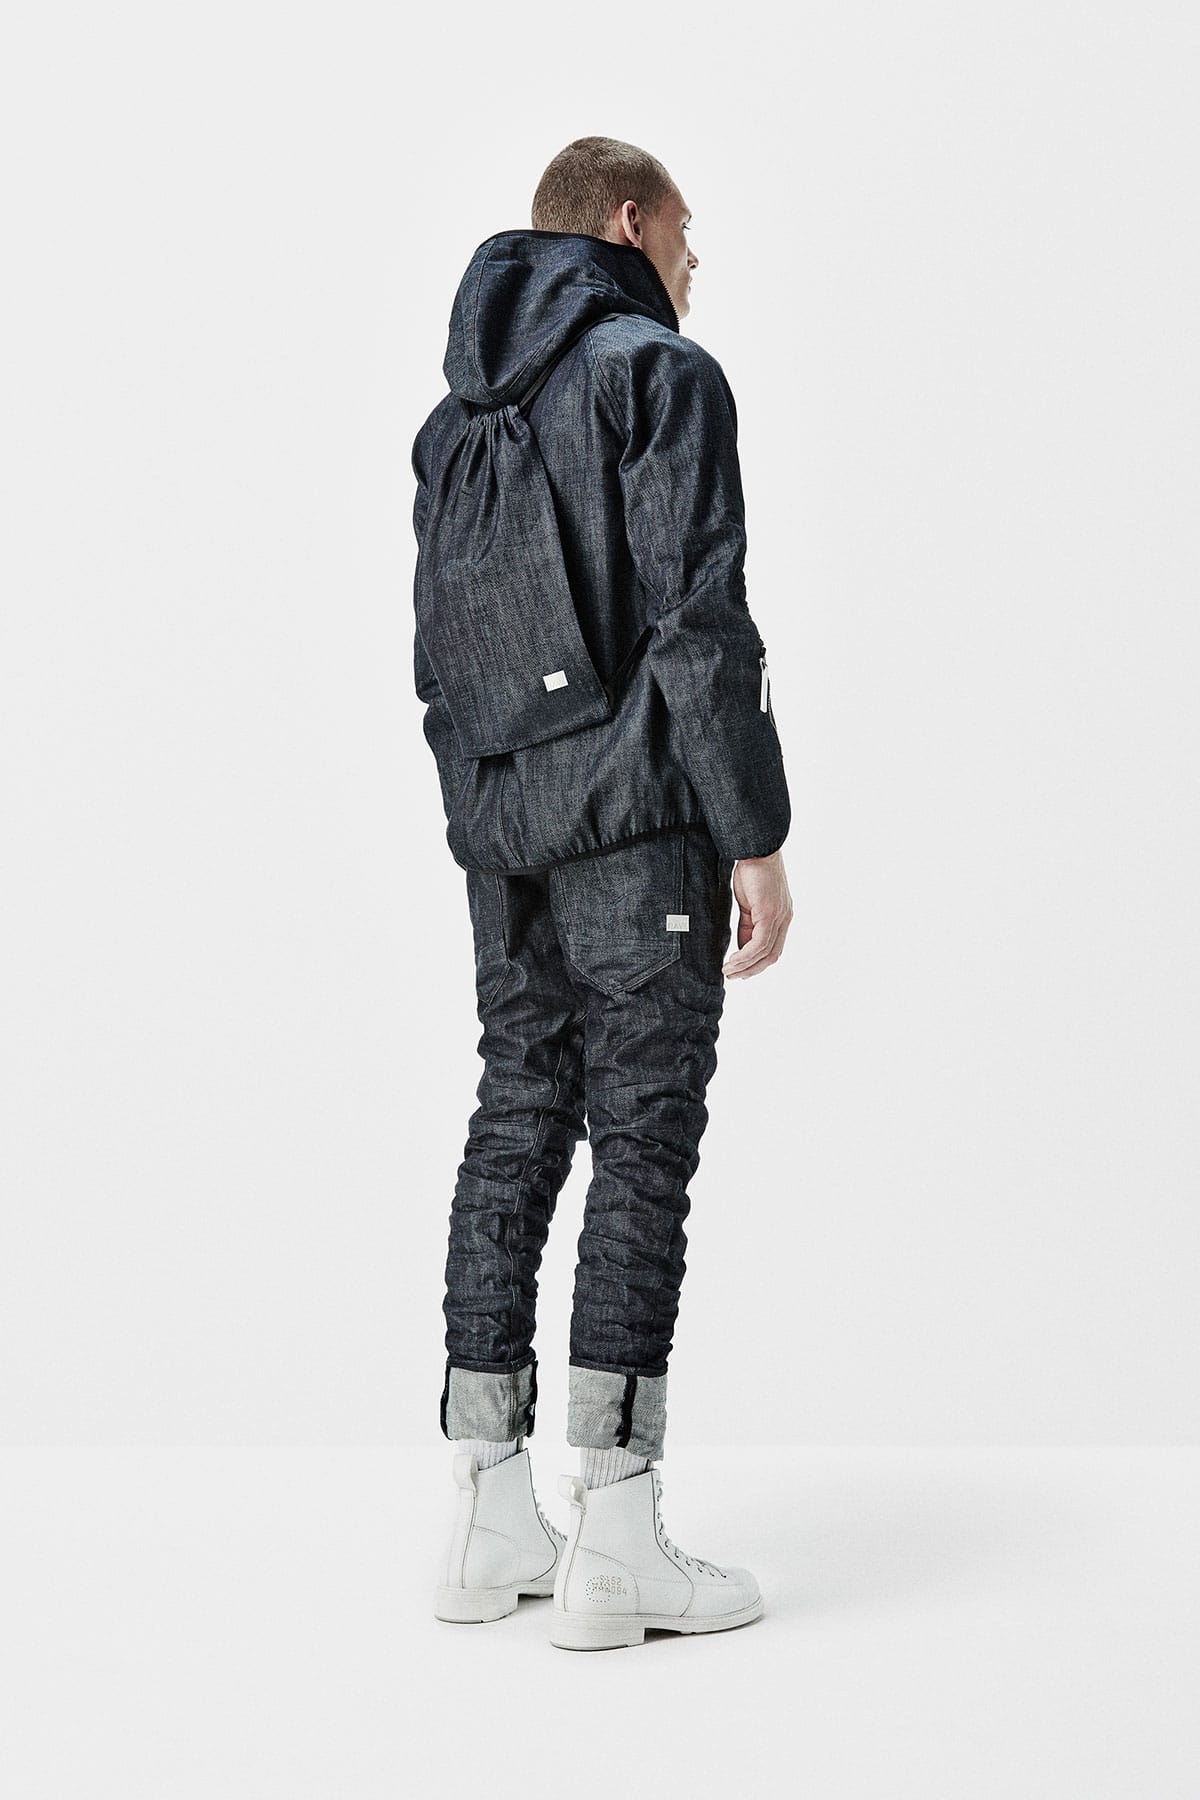 g star raw research